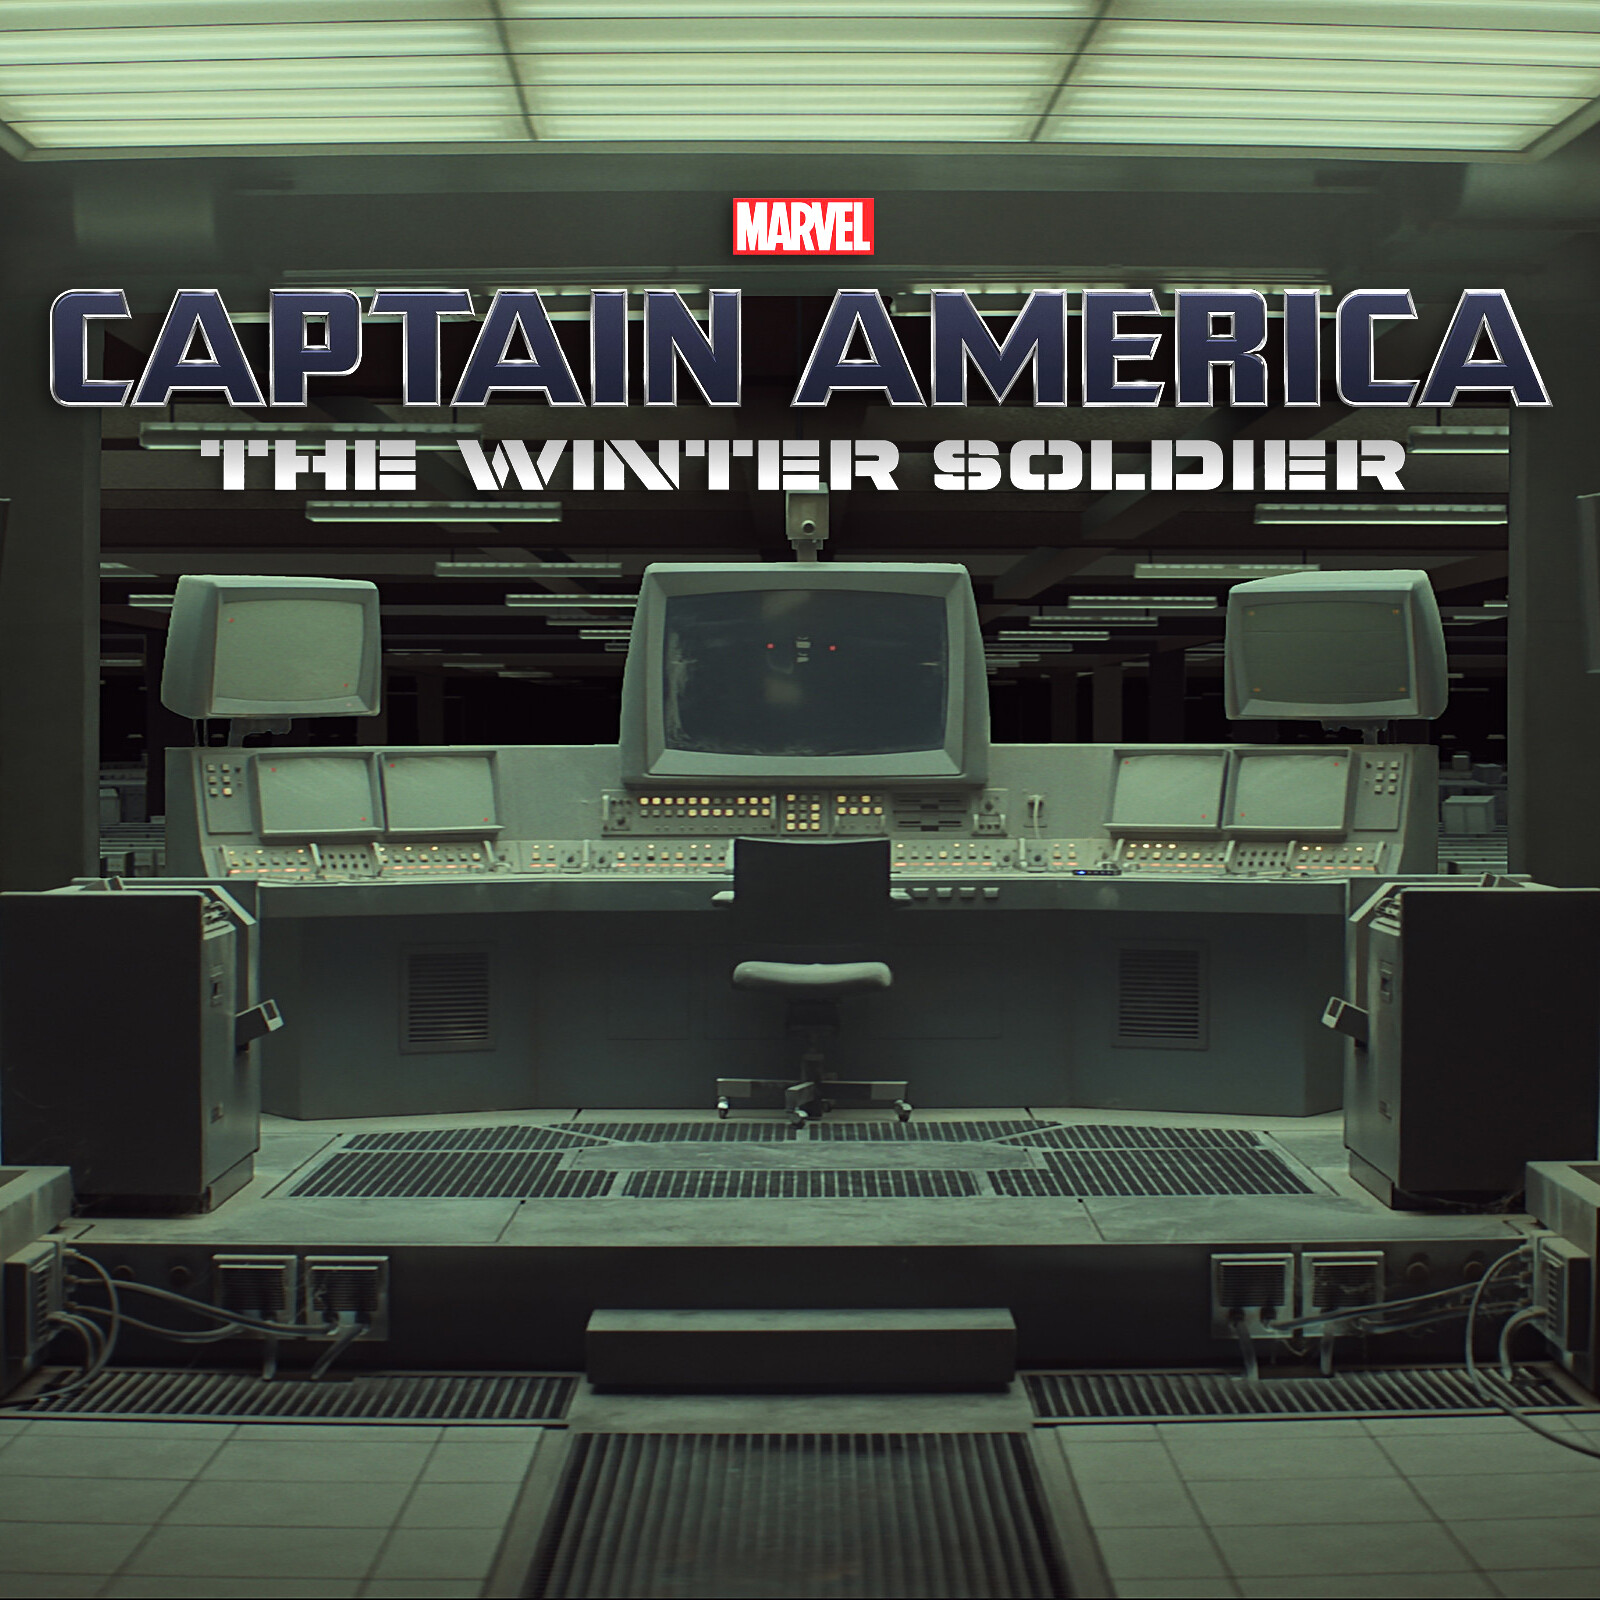 "Captain America: The Winter Soldier", Concept Art for Zola's Room